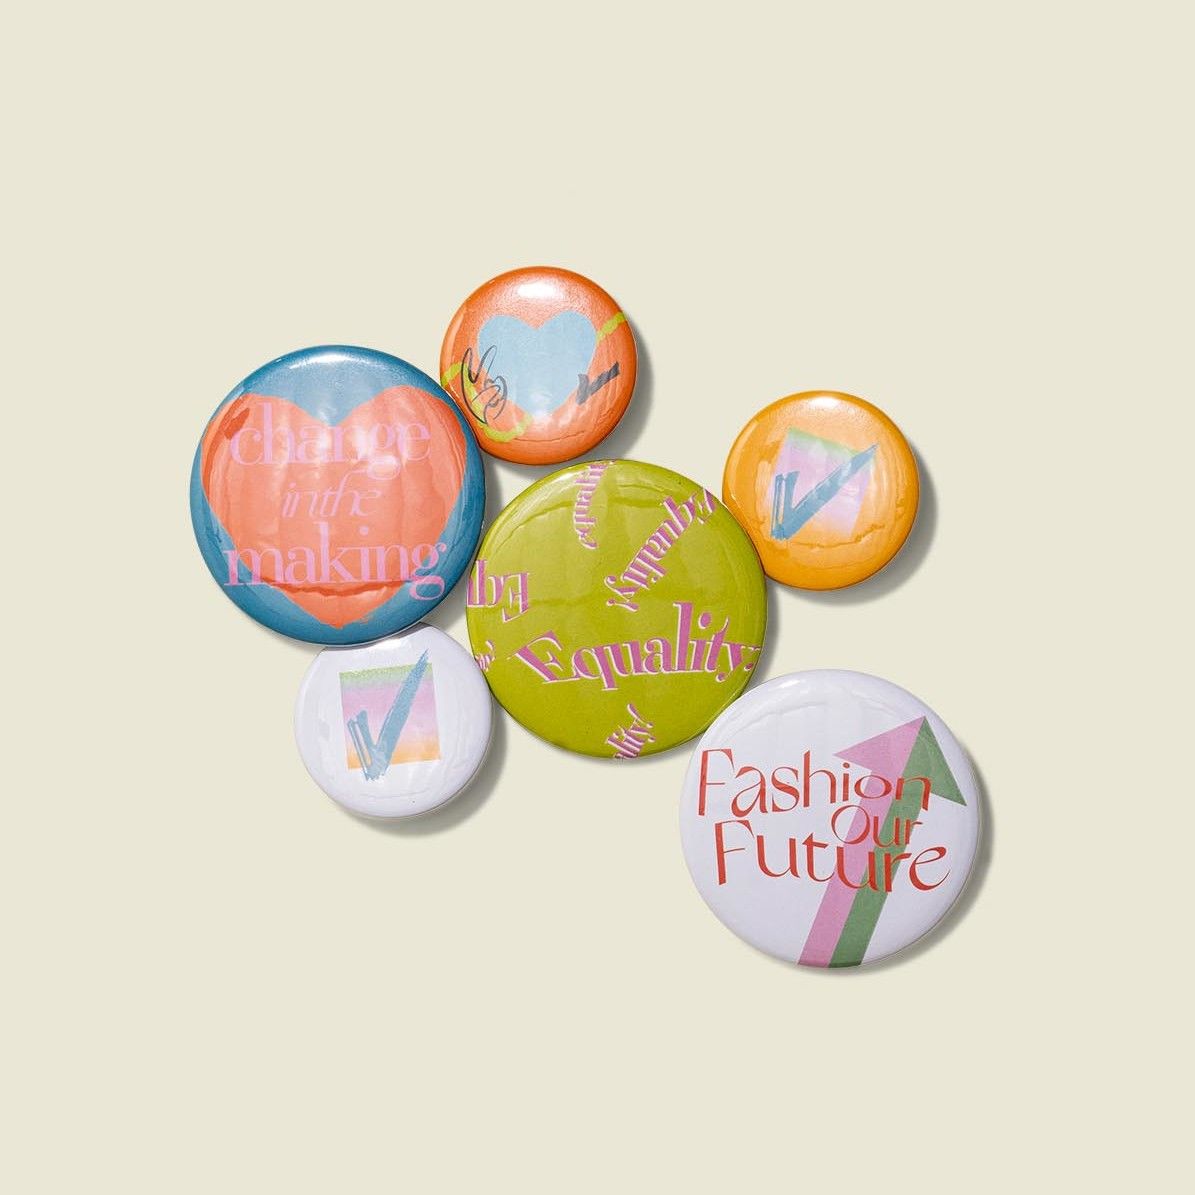 Pin buttons 